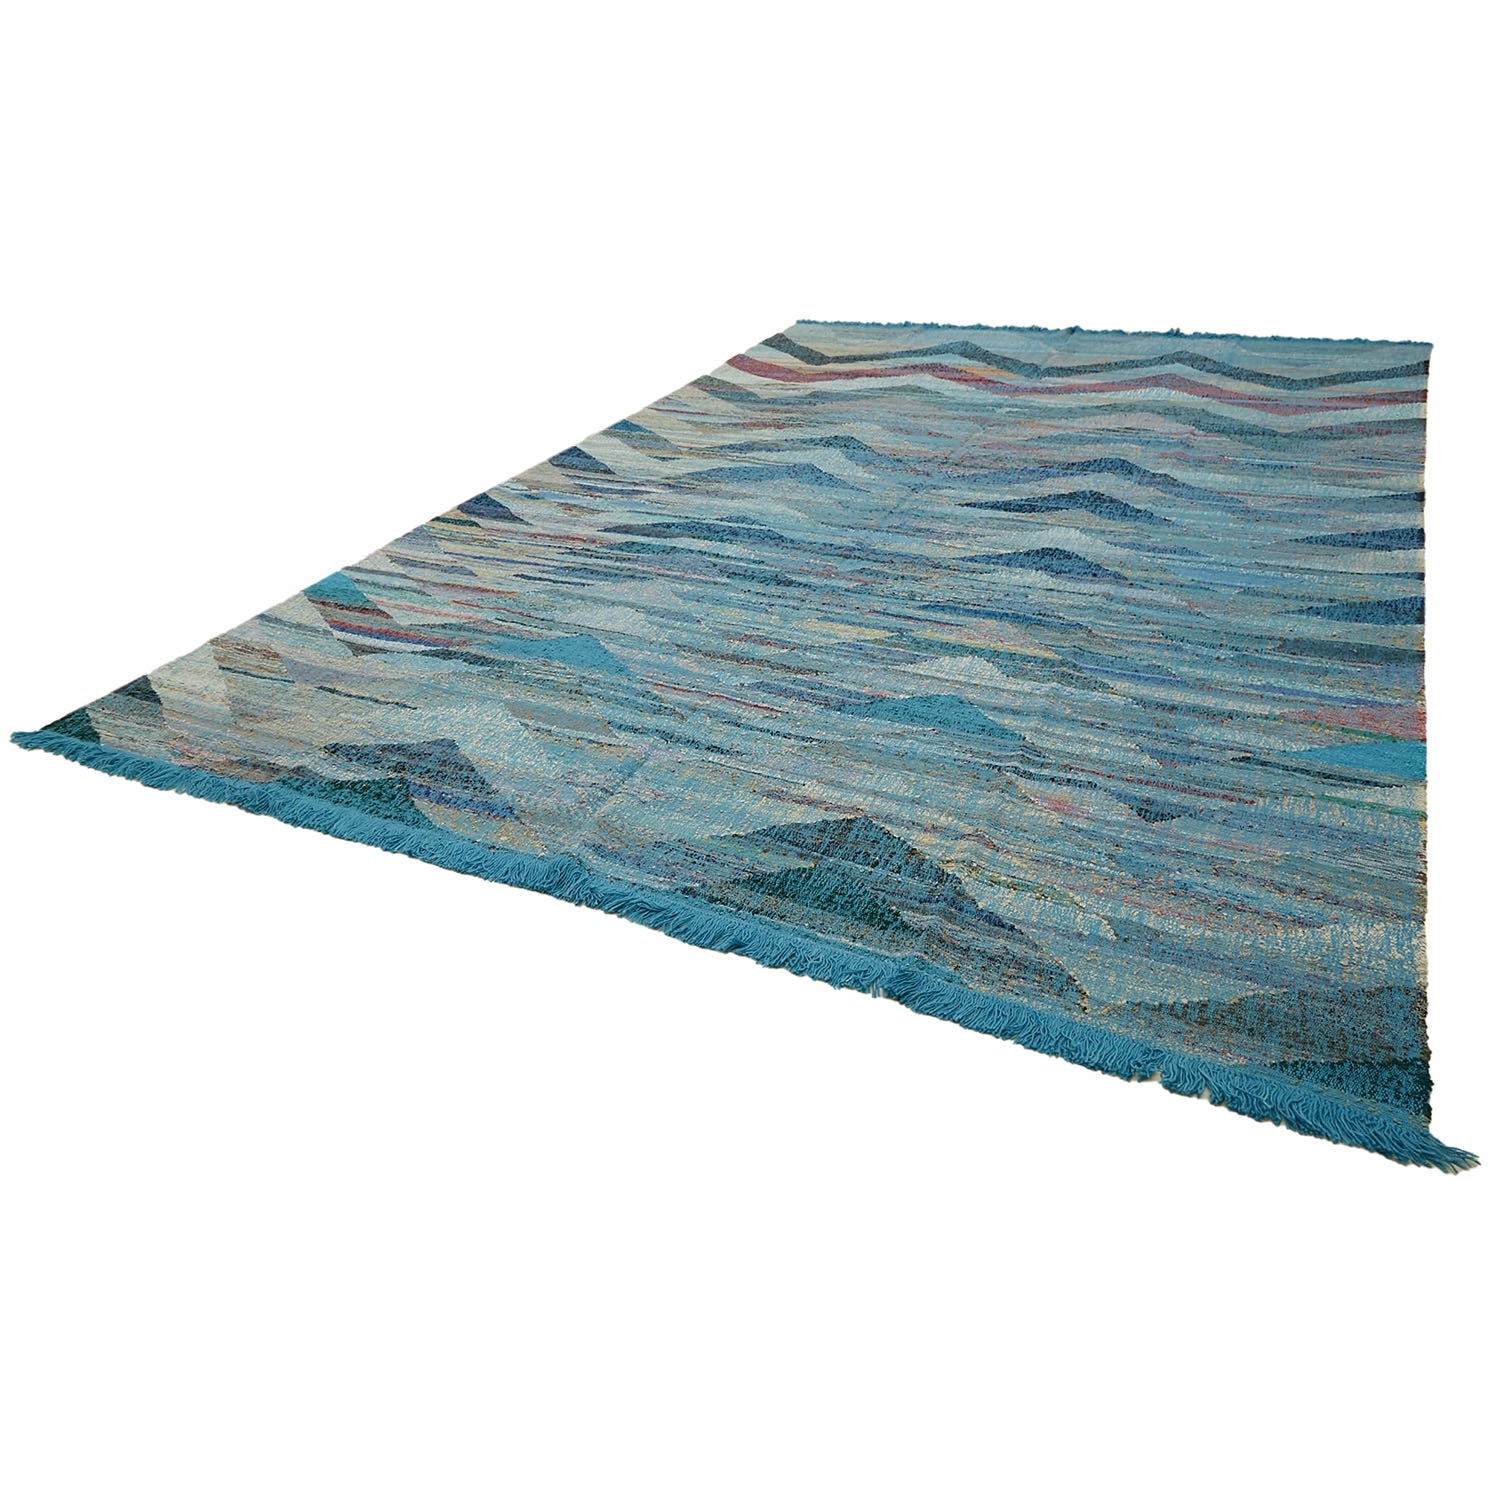 Floating rug with textured waves in blue, turquoise, and grey.